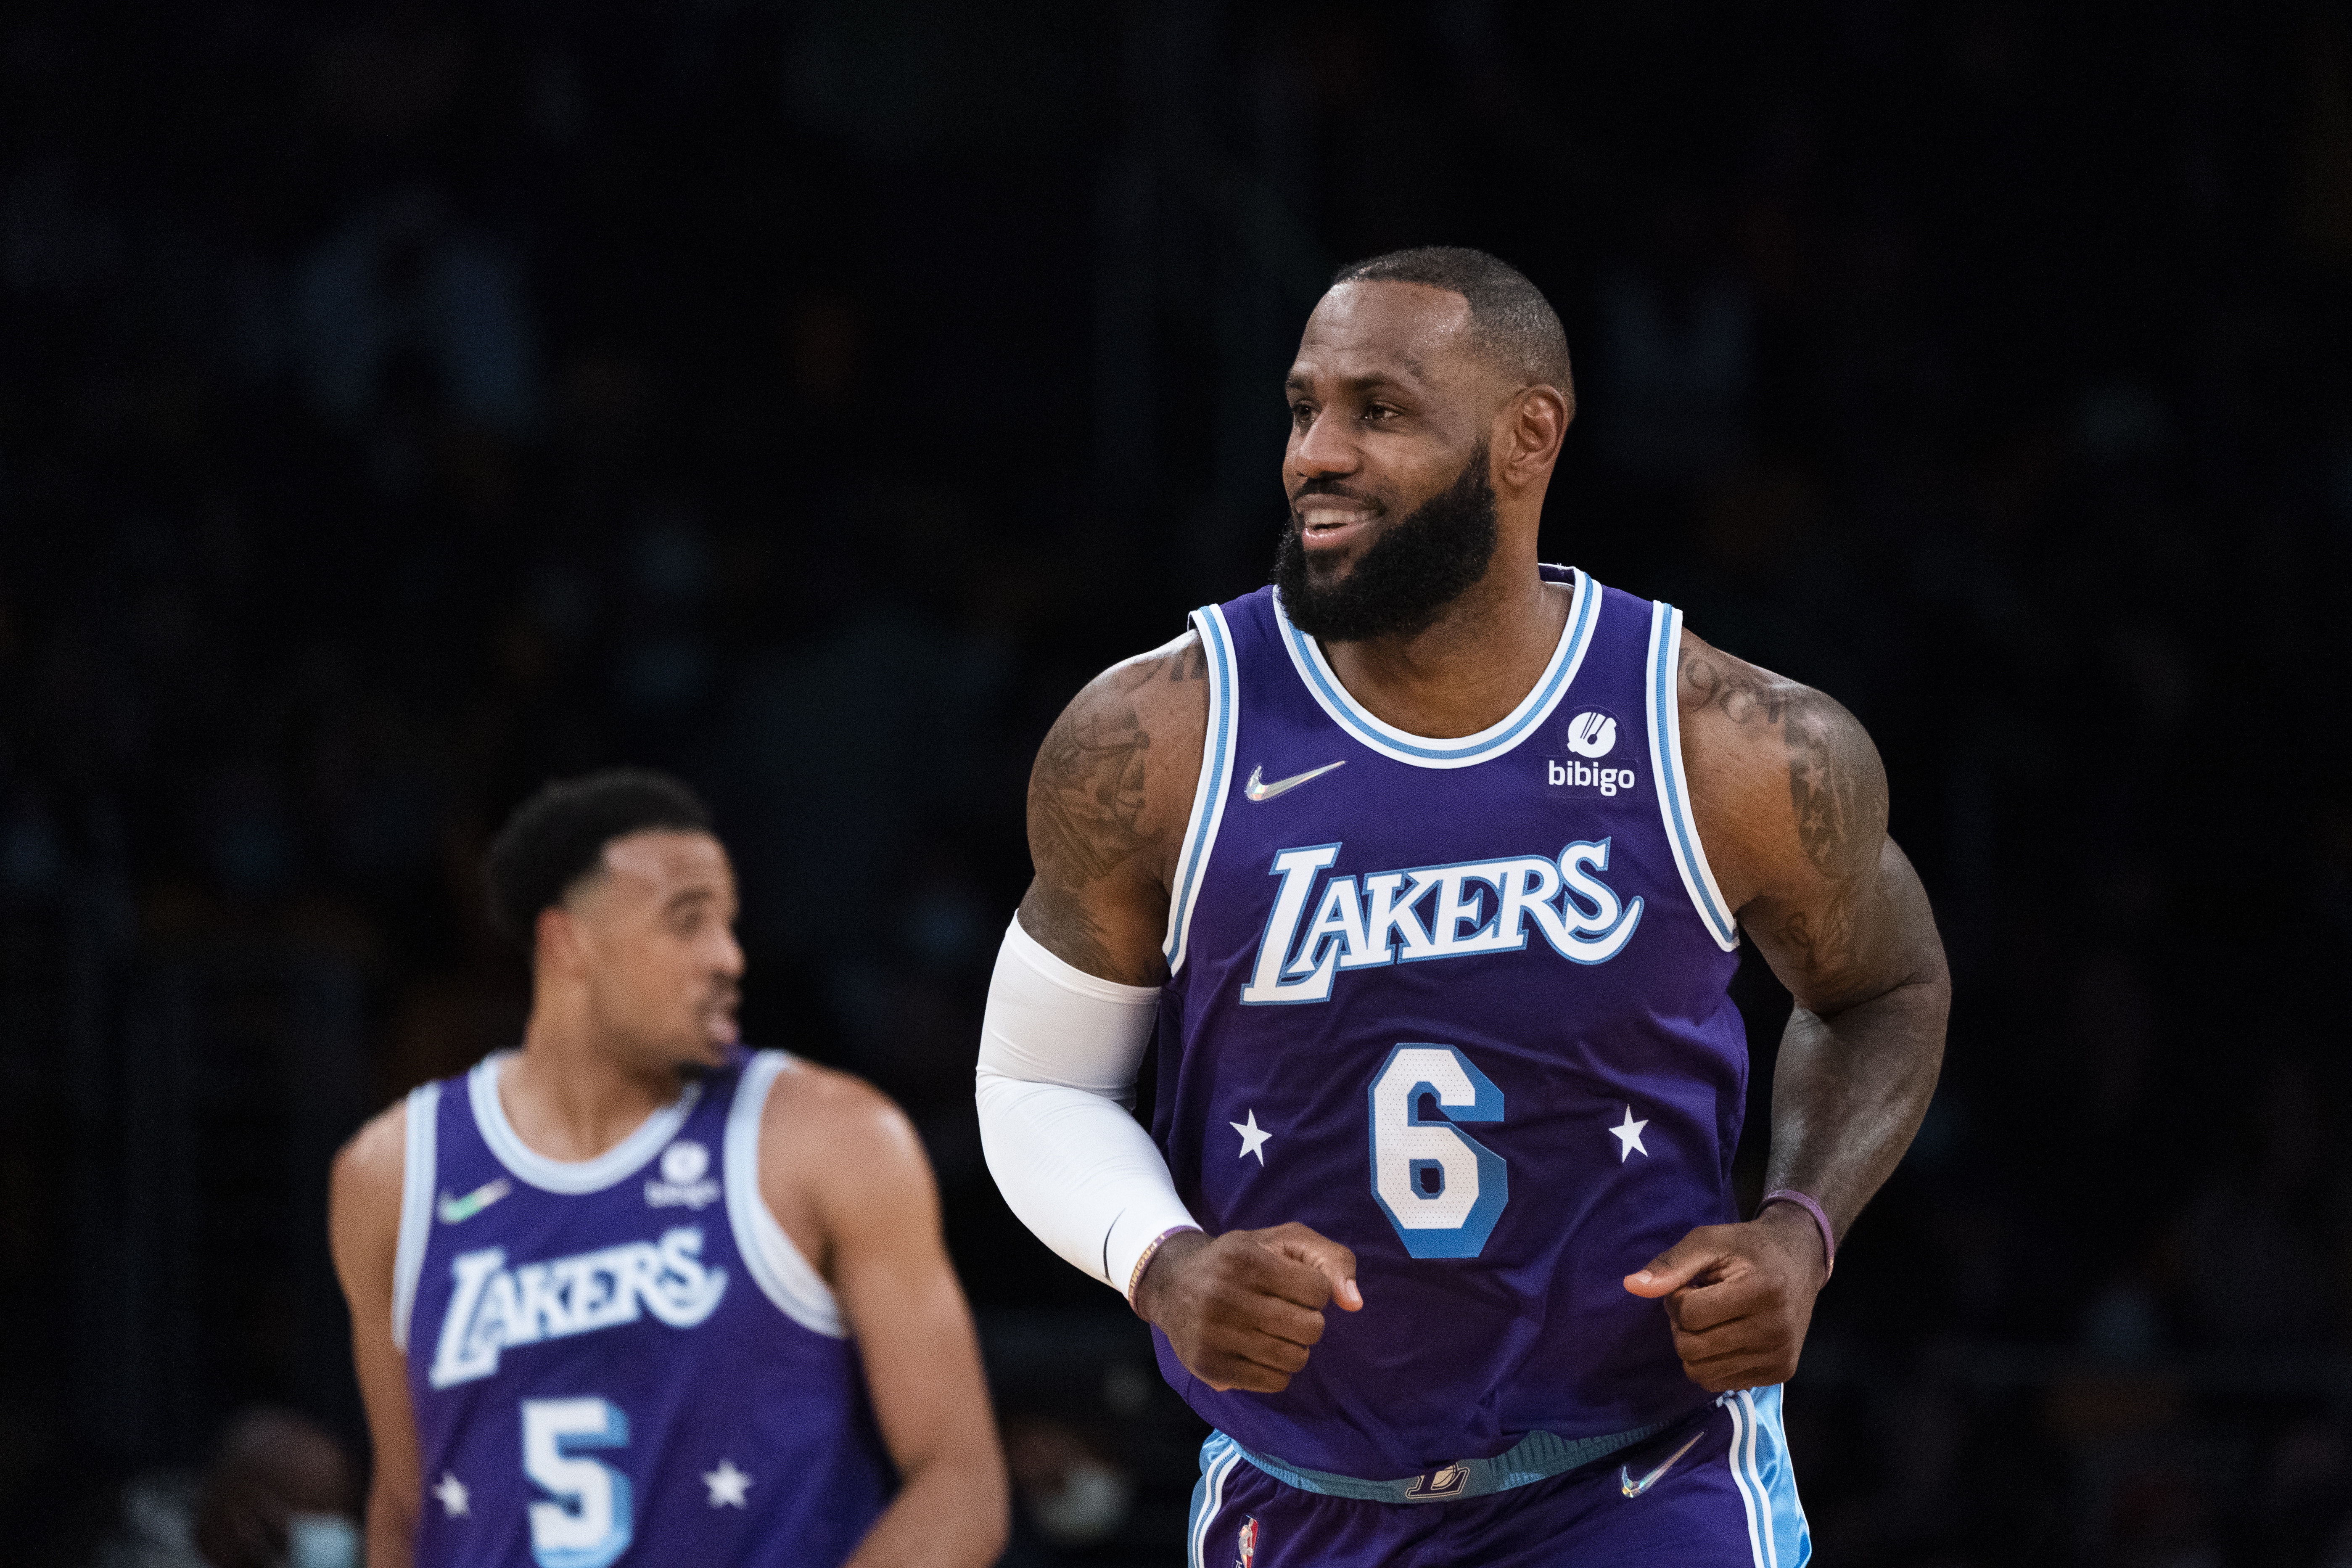 LeBron James, Lakers star says it's an honor to play on Christmas amid Injuries COVID thumbnail